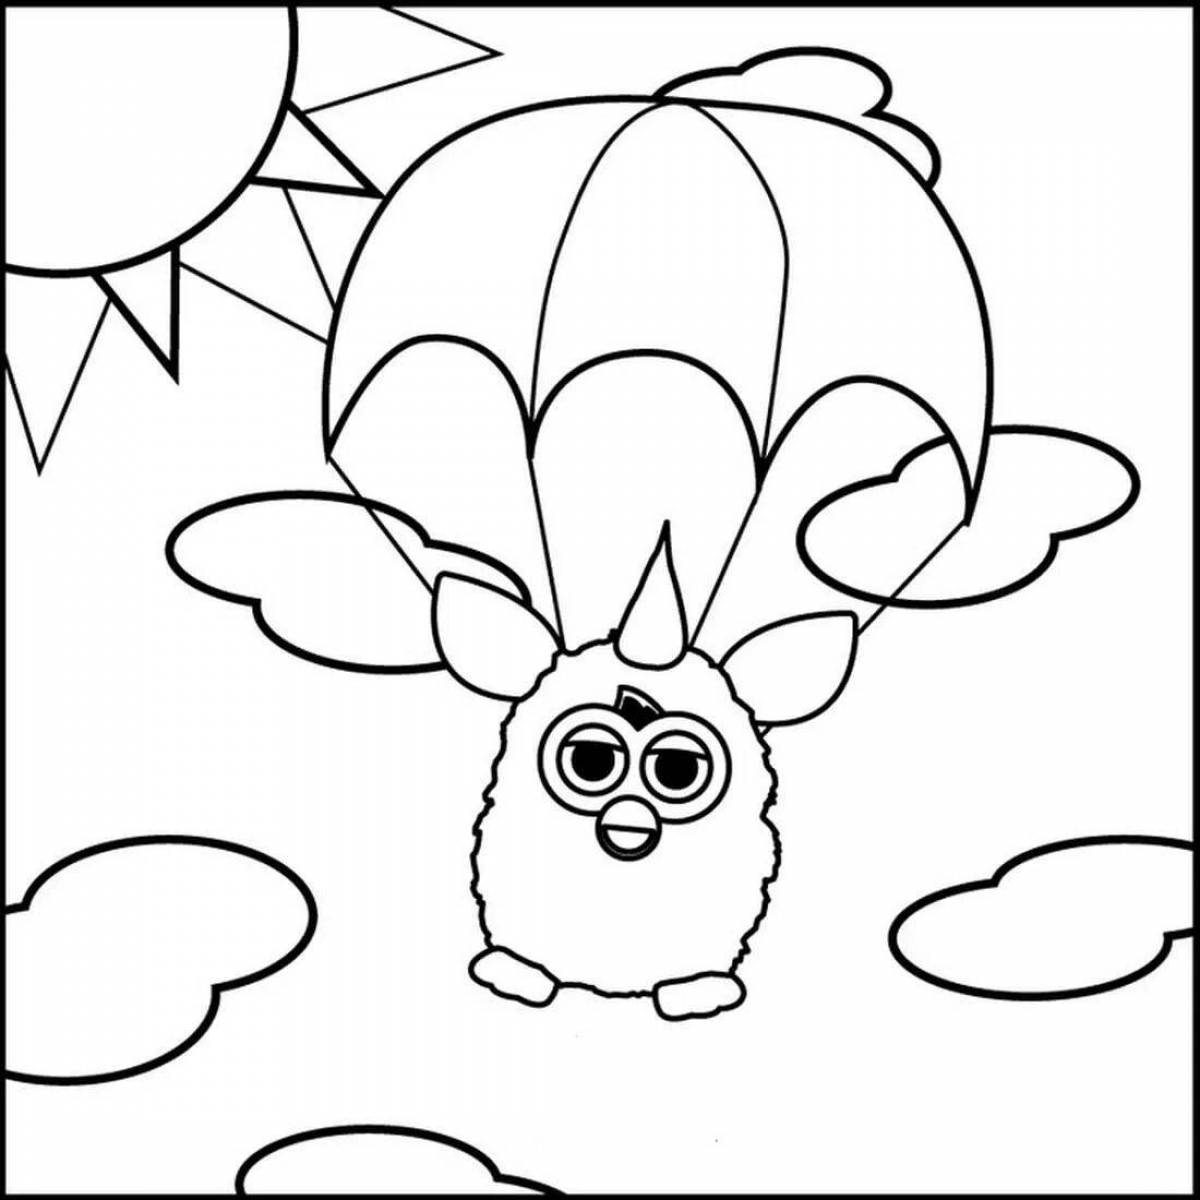 Intriguing furry spy coloring page